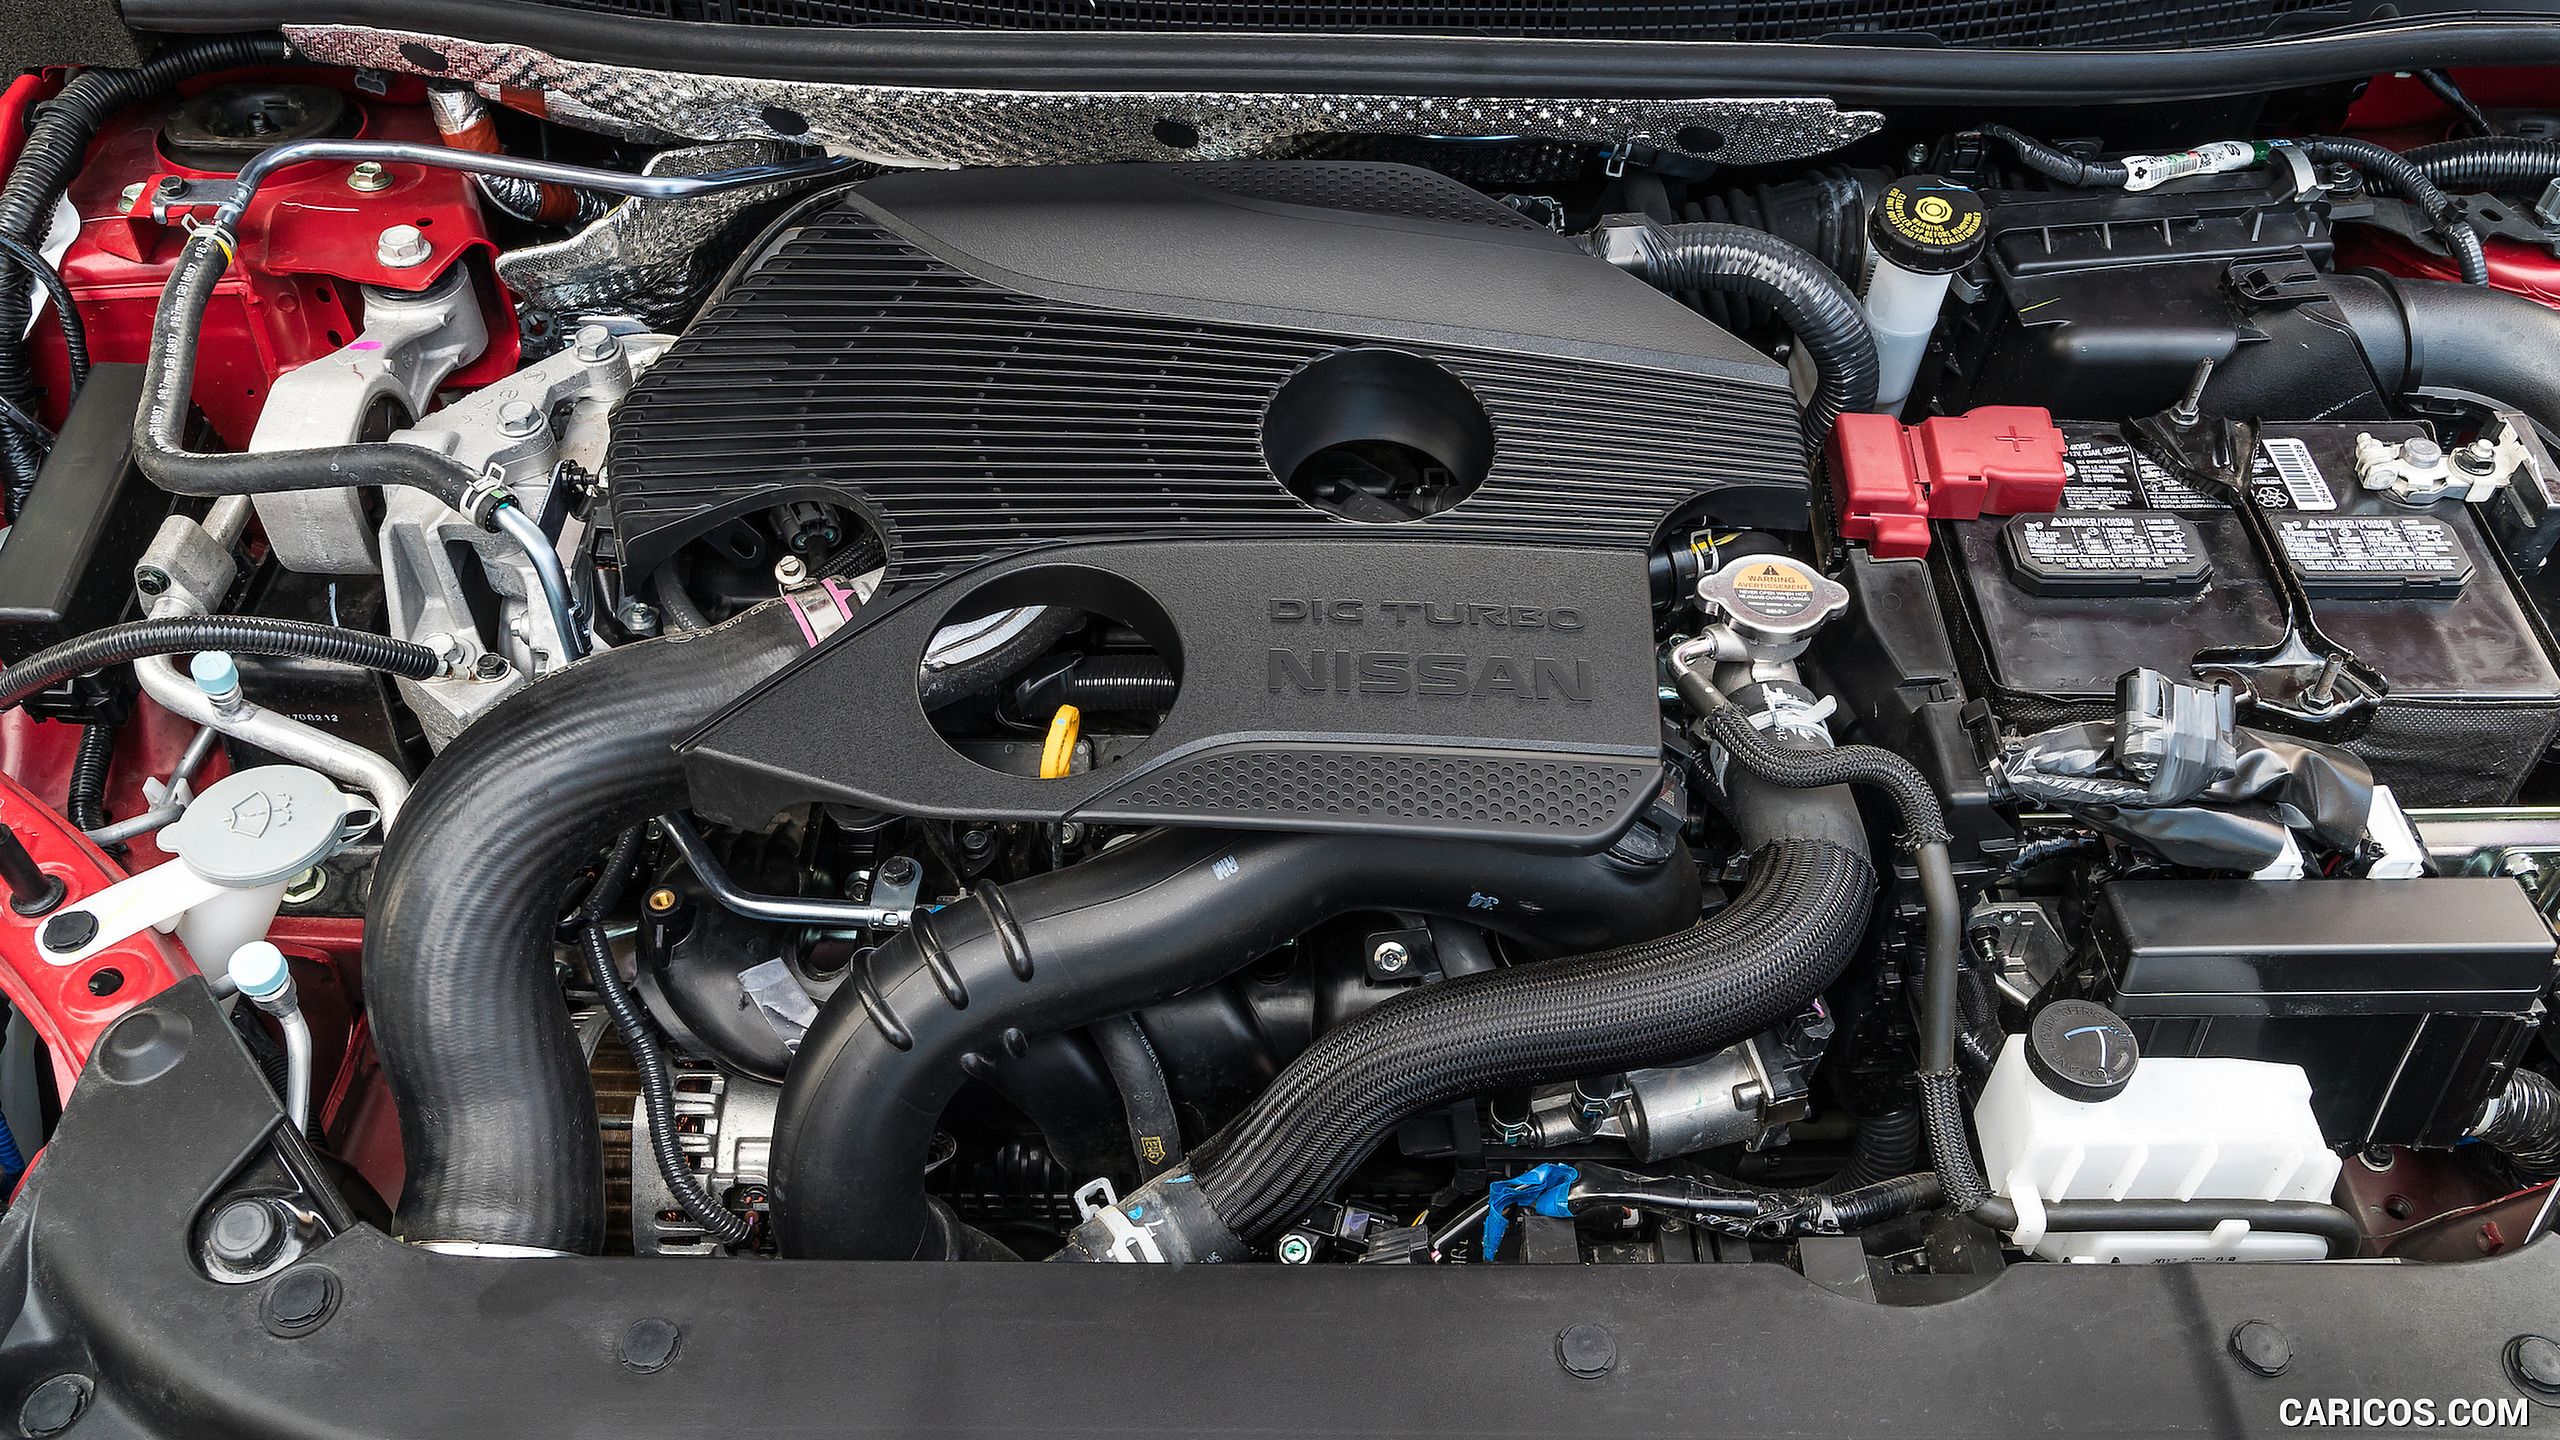 Awesome Turbo Car Engine Wallpaper HD image